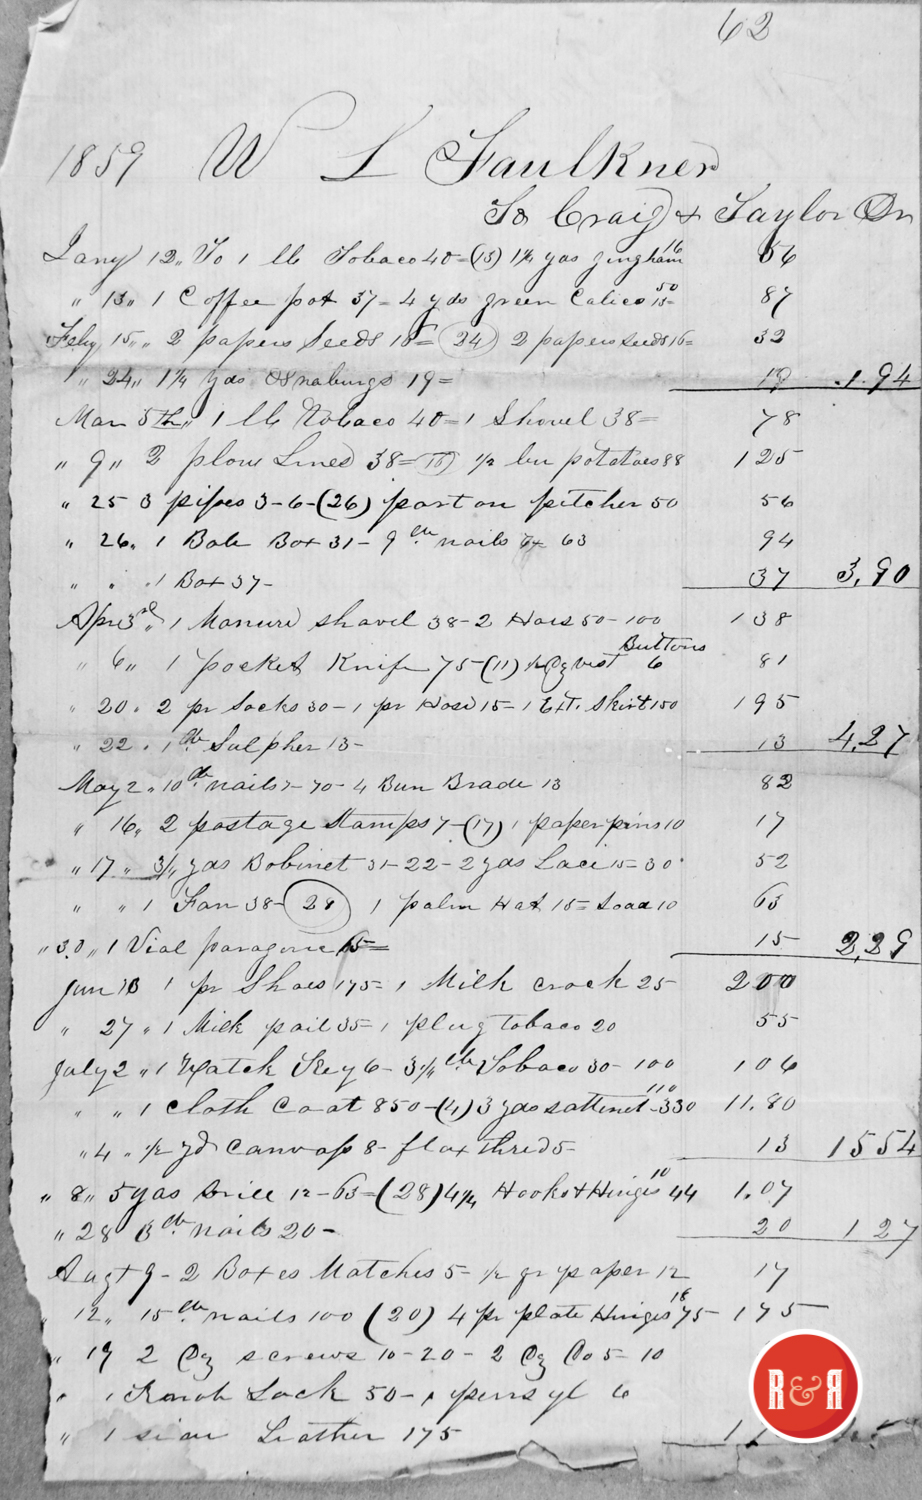 LEDGER FROM CRAIG AND TAYLOR - 1860, p. 3